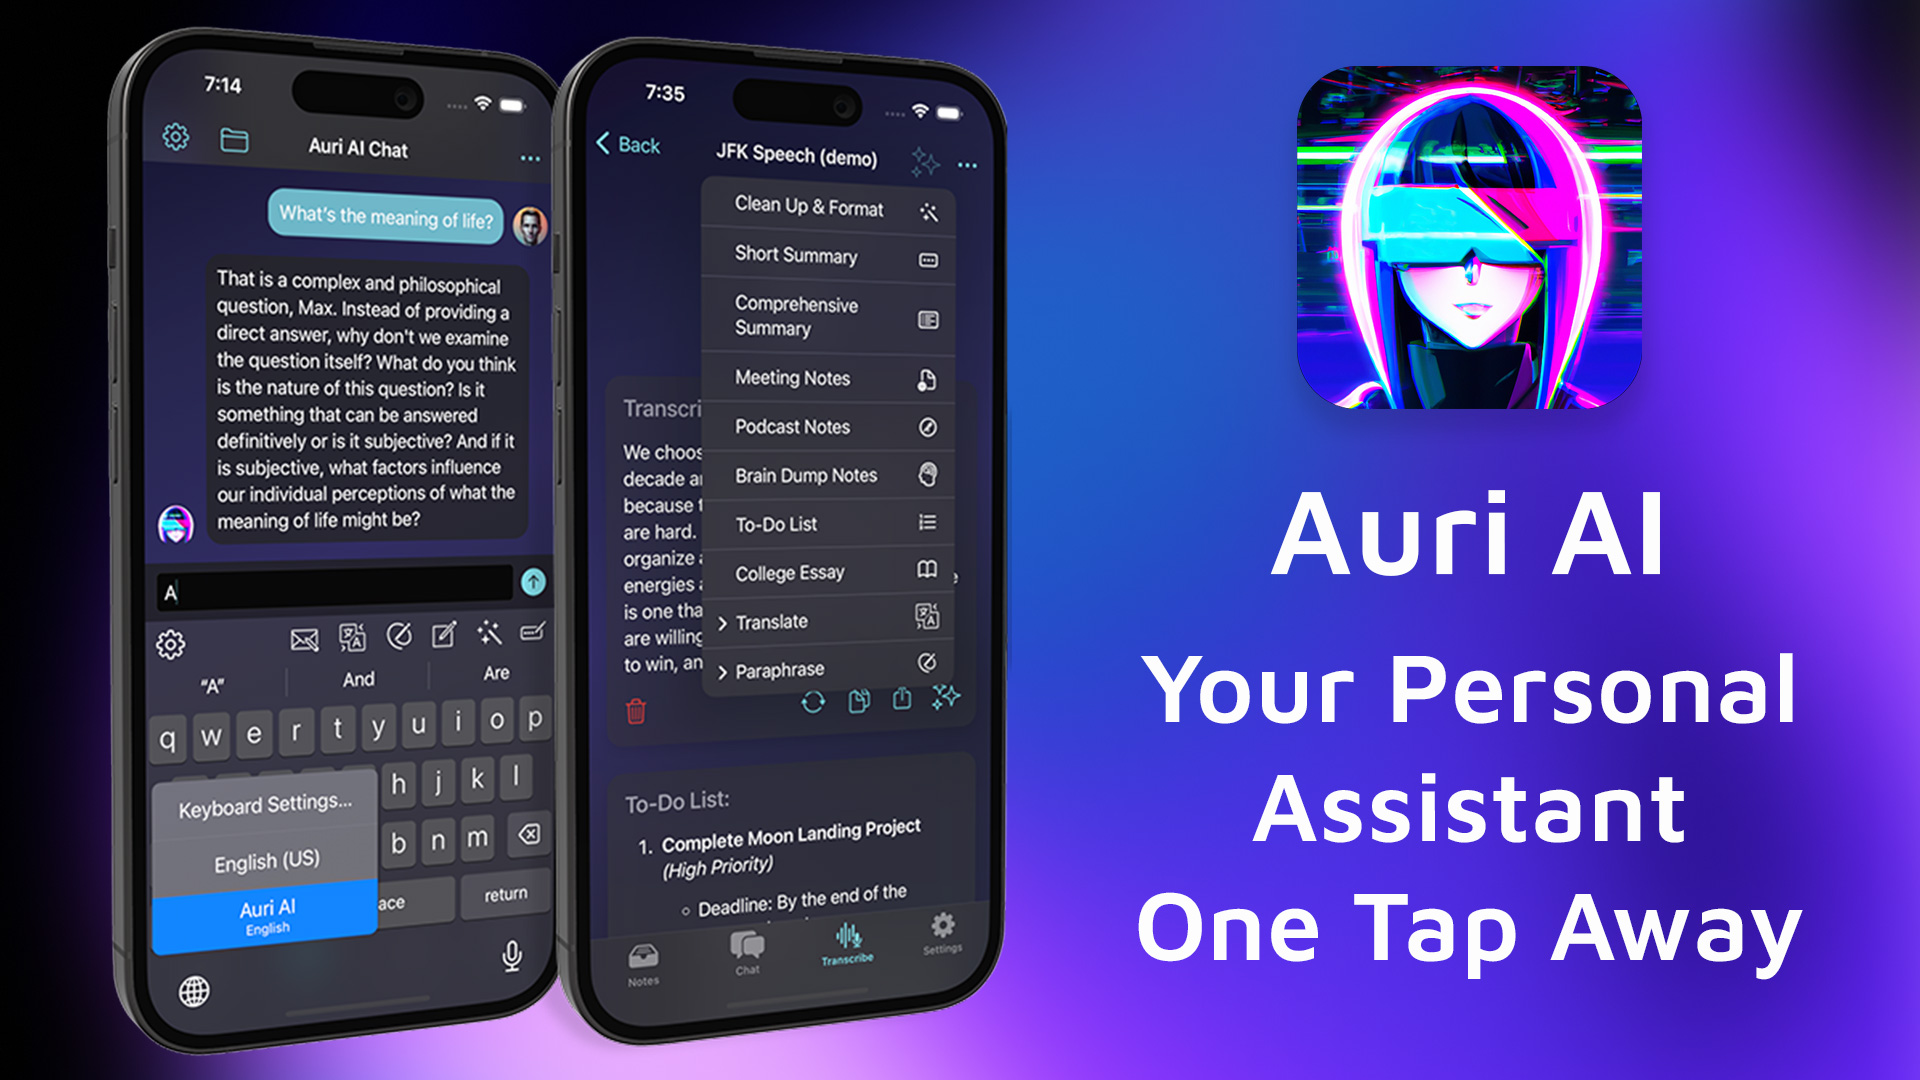 OneTap - Your Keyboard Assistant